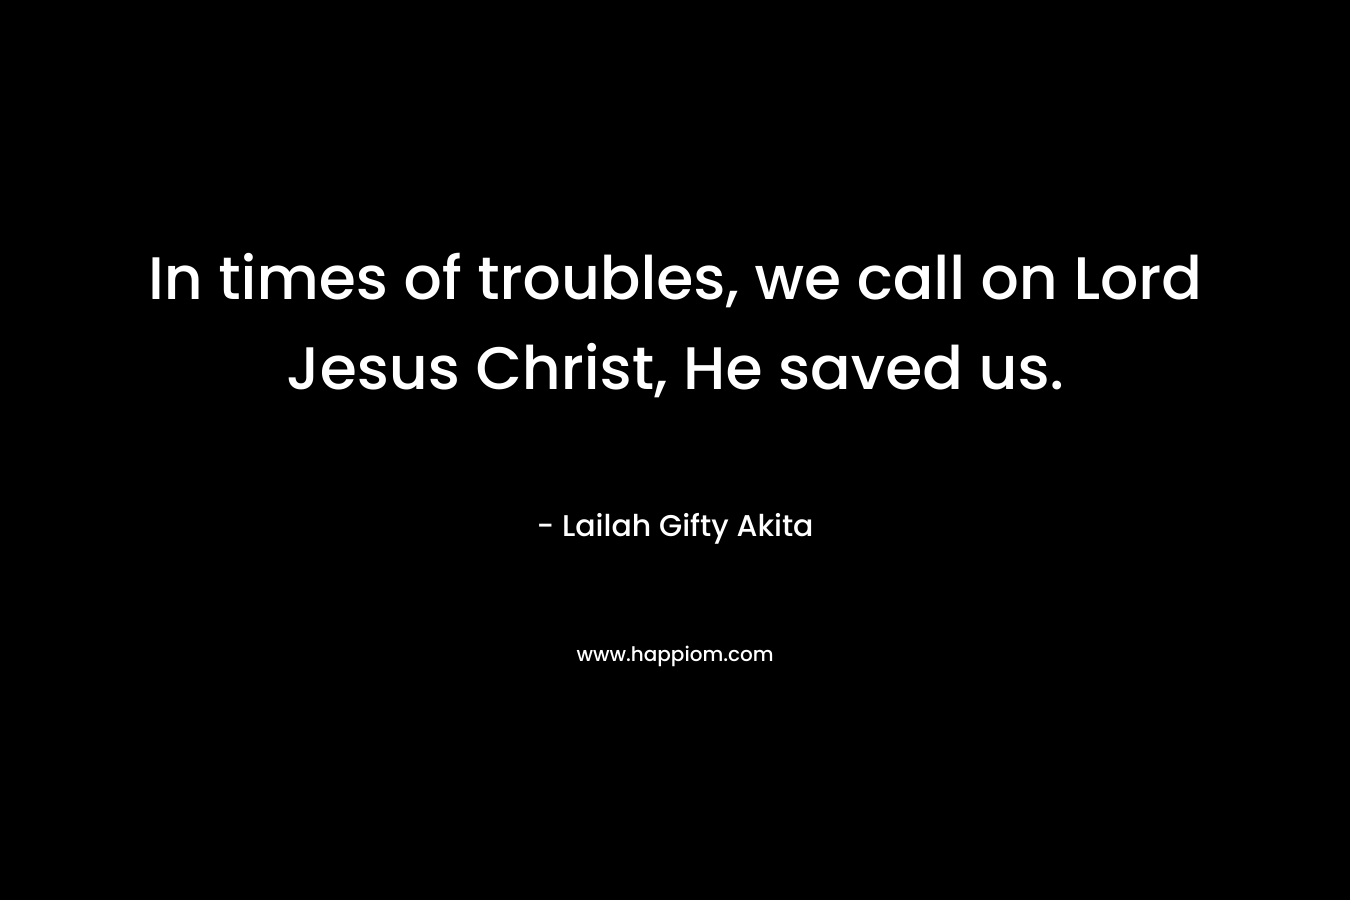 In times of troubles, we call on Lord Jesus Christ, He saved us. – Lailah Gifty Akita